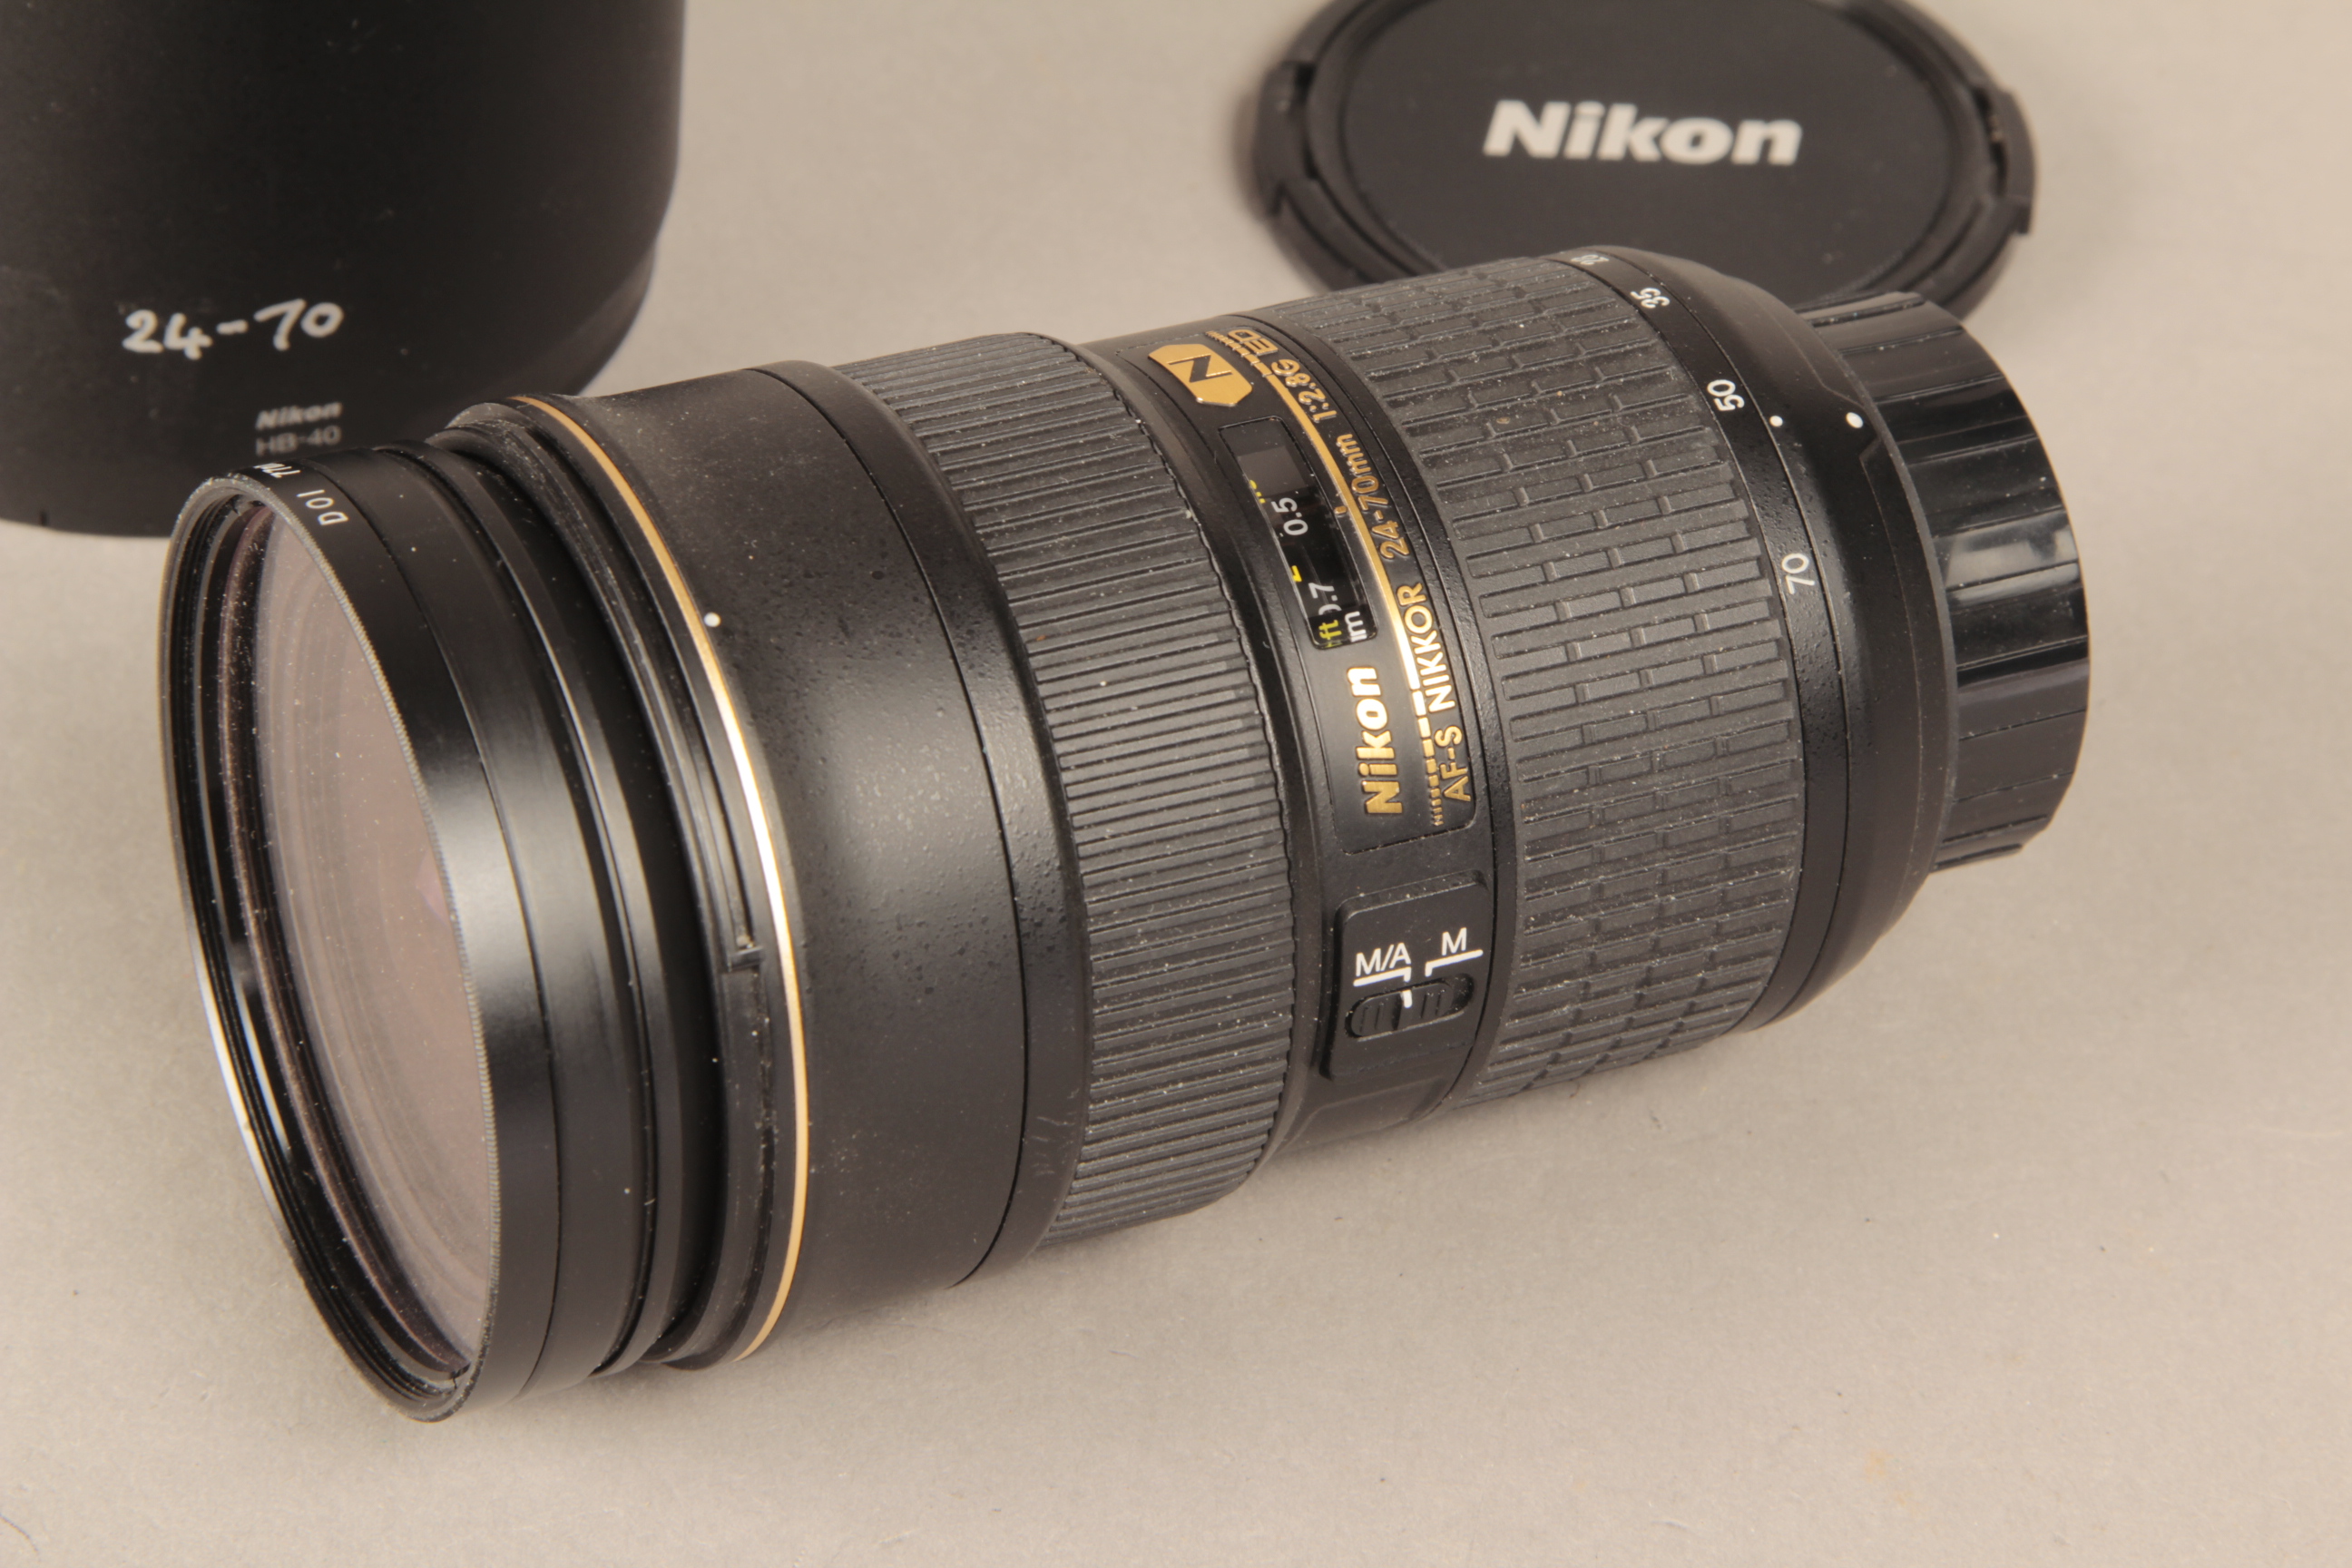 A Nikon AF-S 24-70 Lens, F2.8G ED type with caps and hood